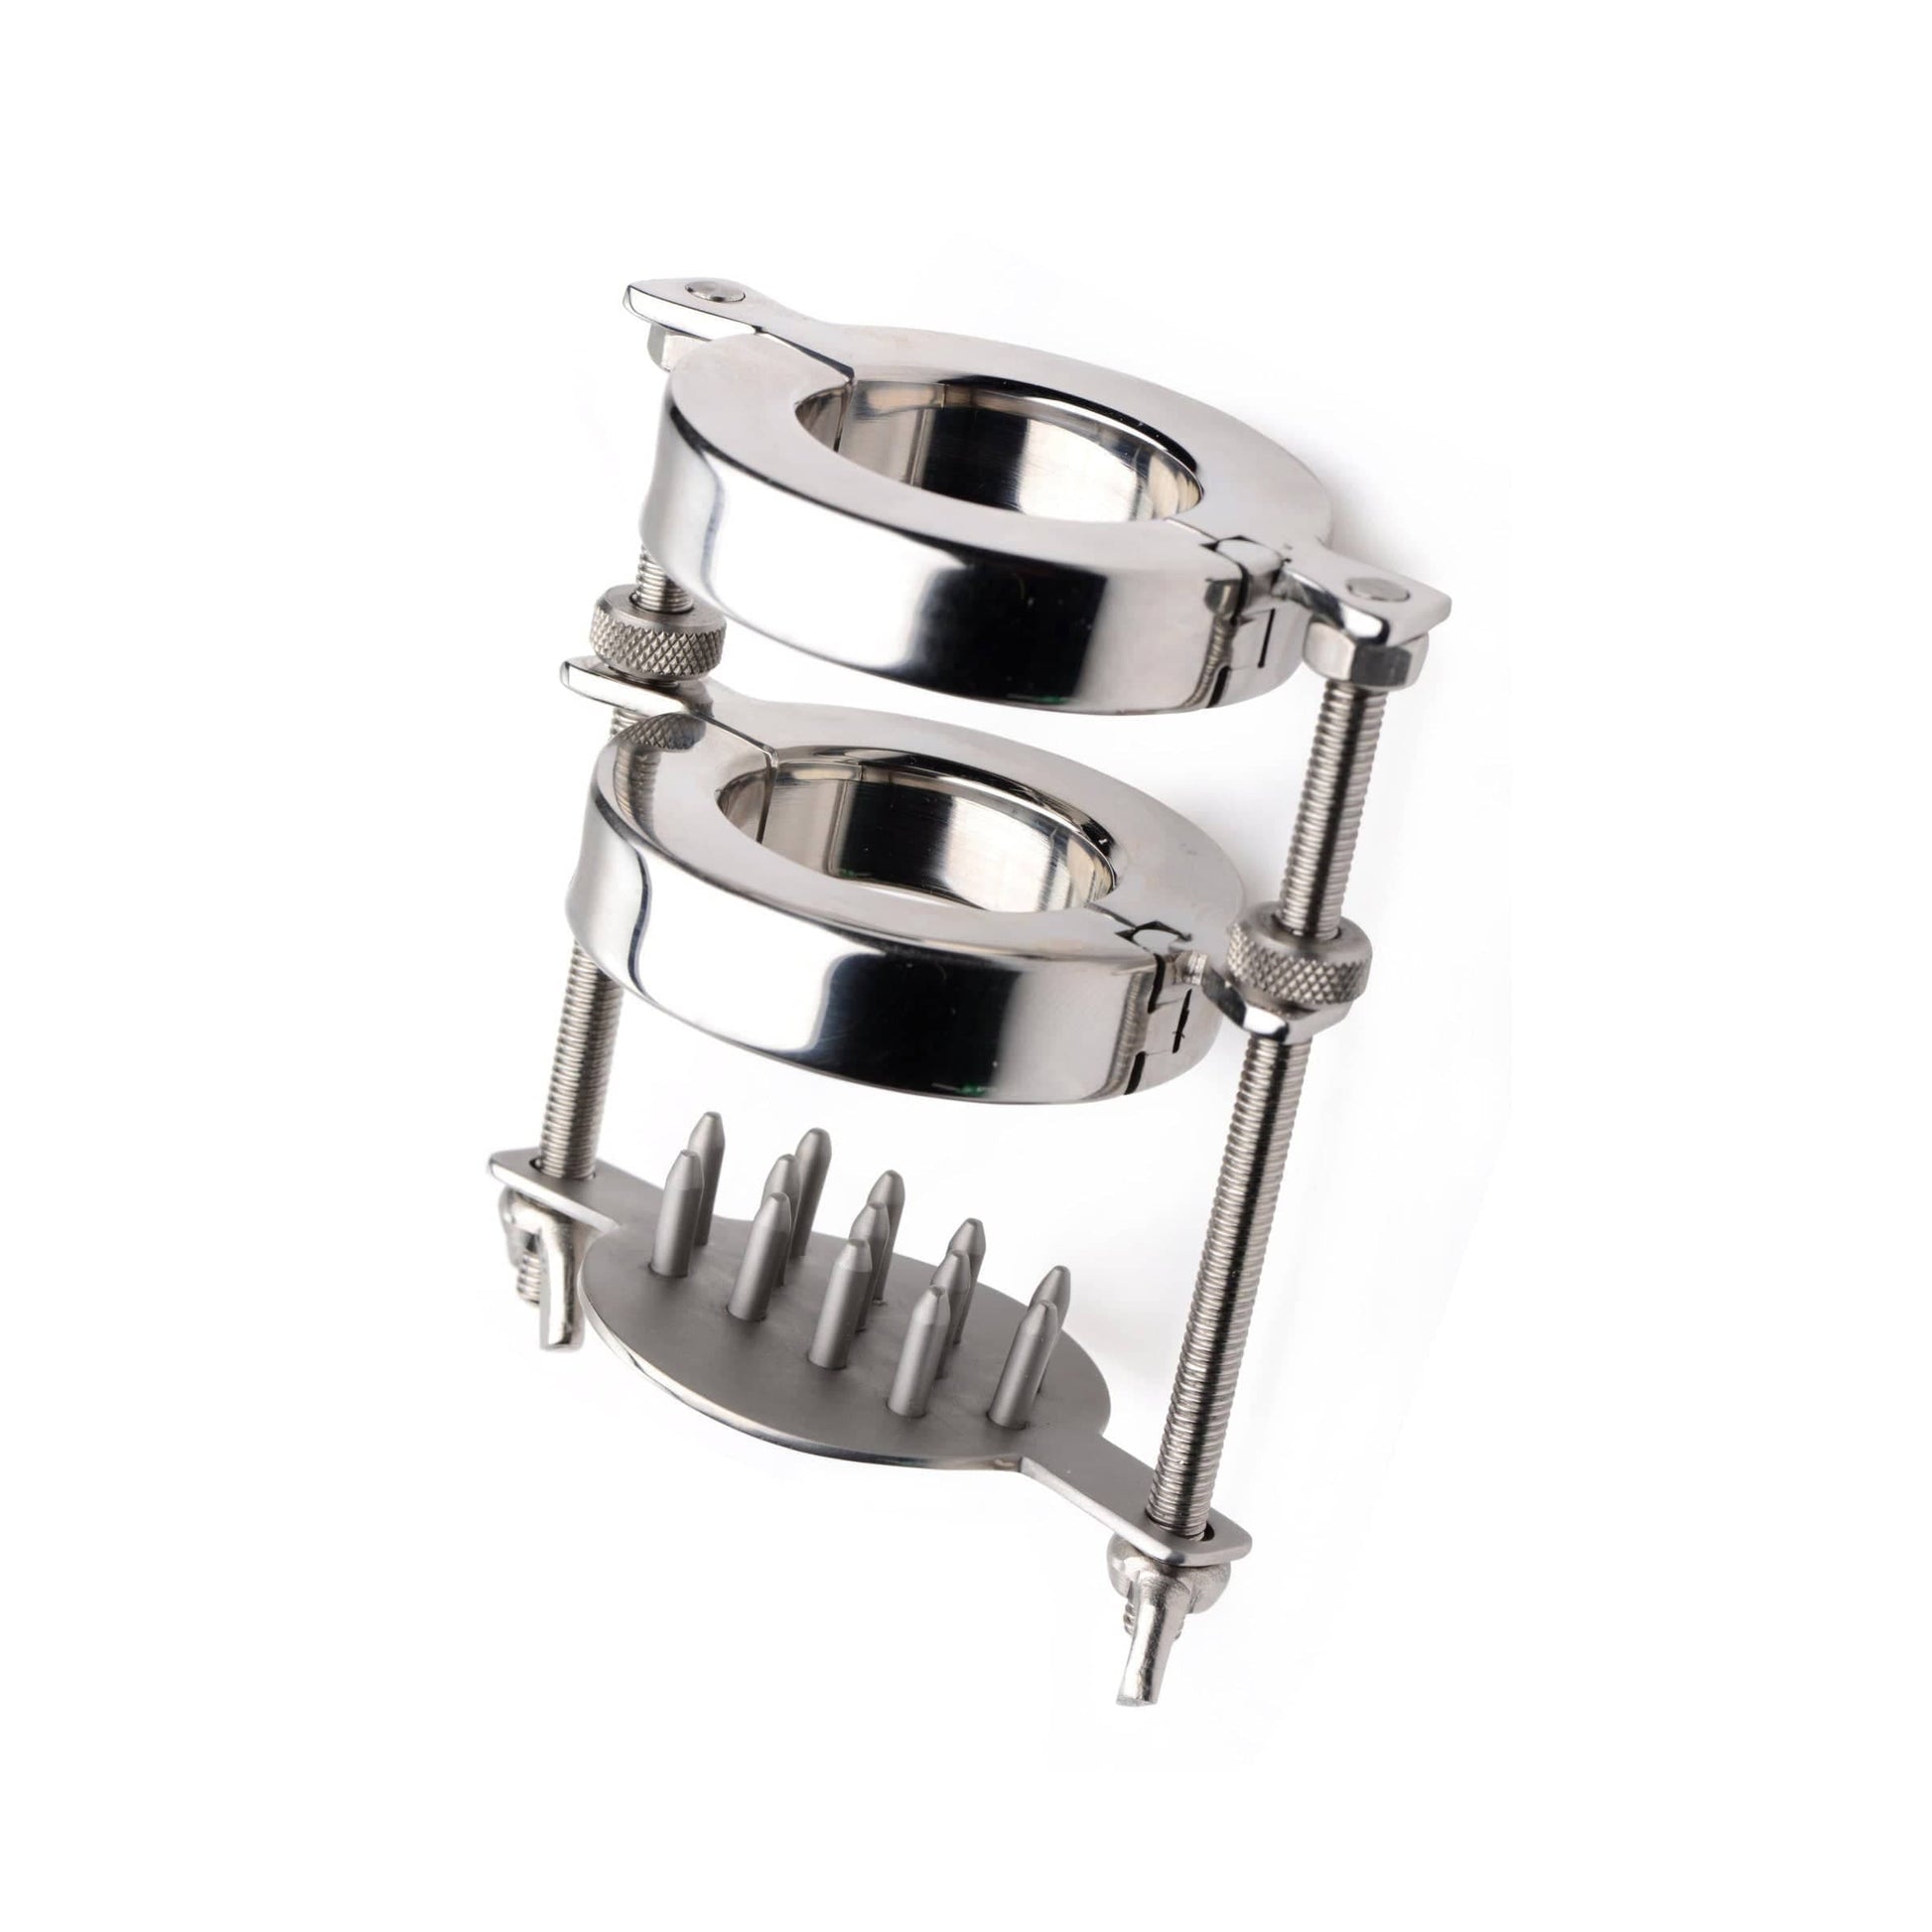 Stainless Steel Spiked Cbt Ball Stretcher And Crusher - The Haus